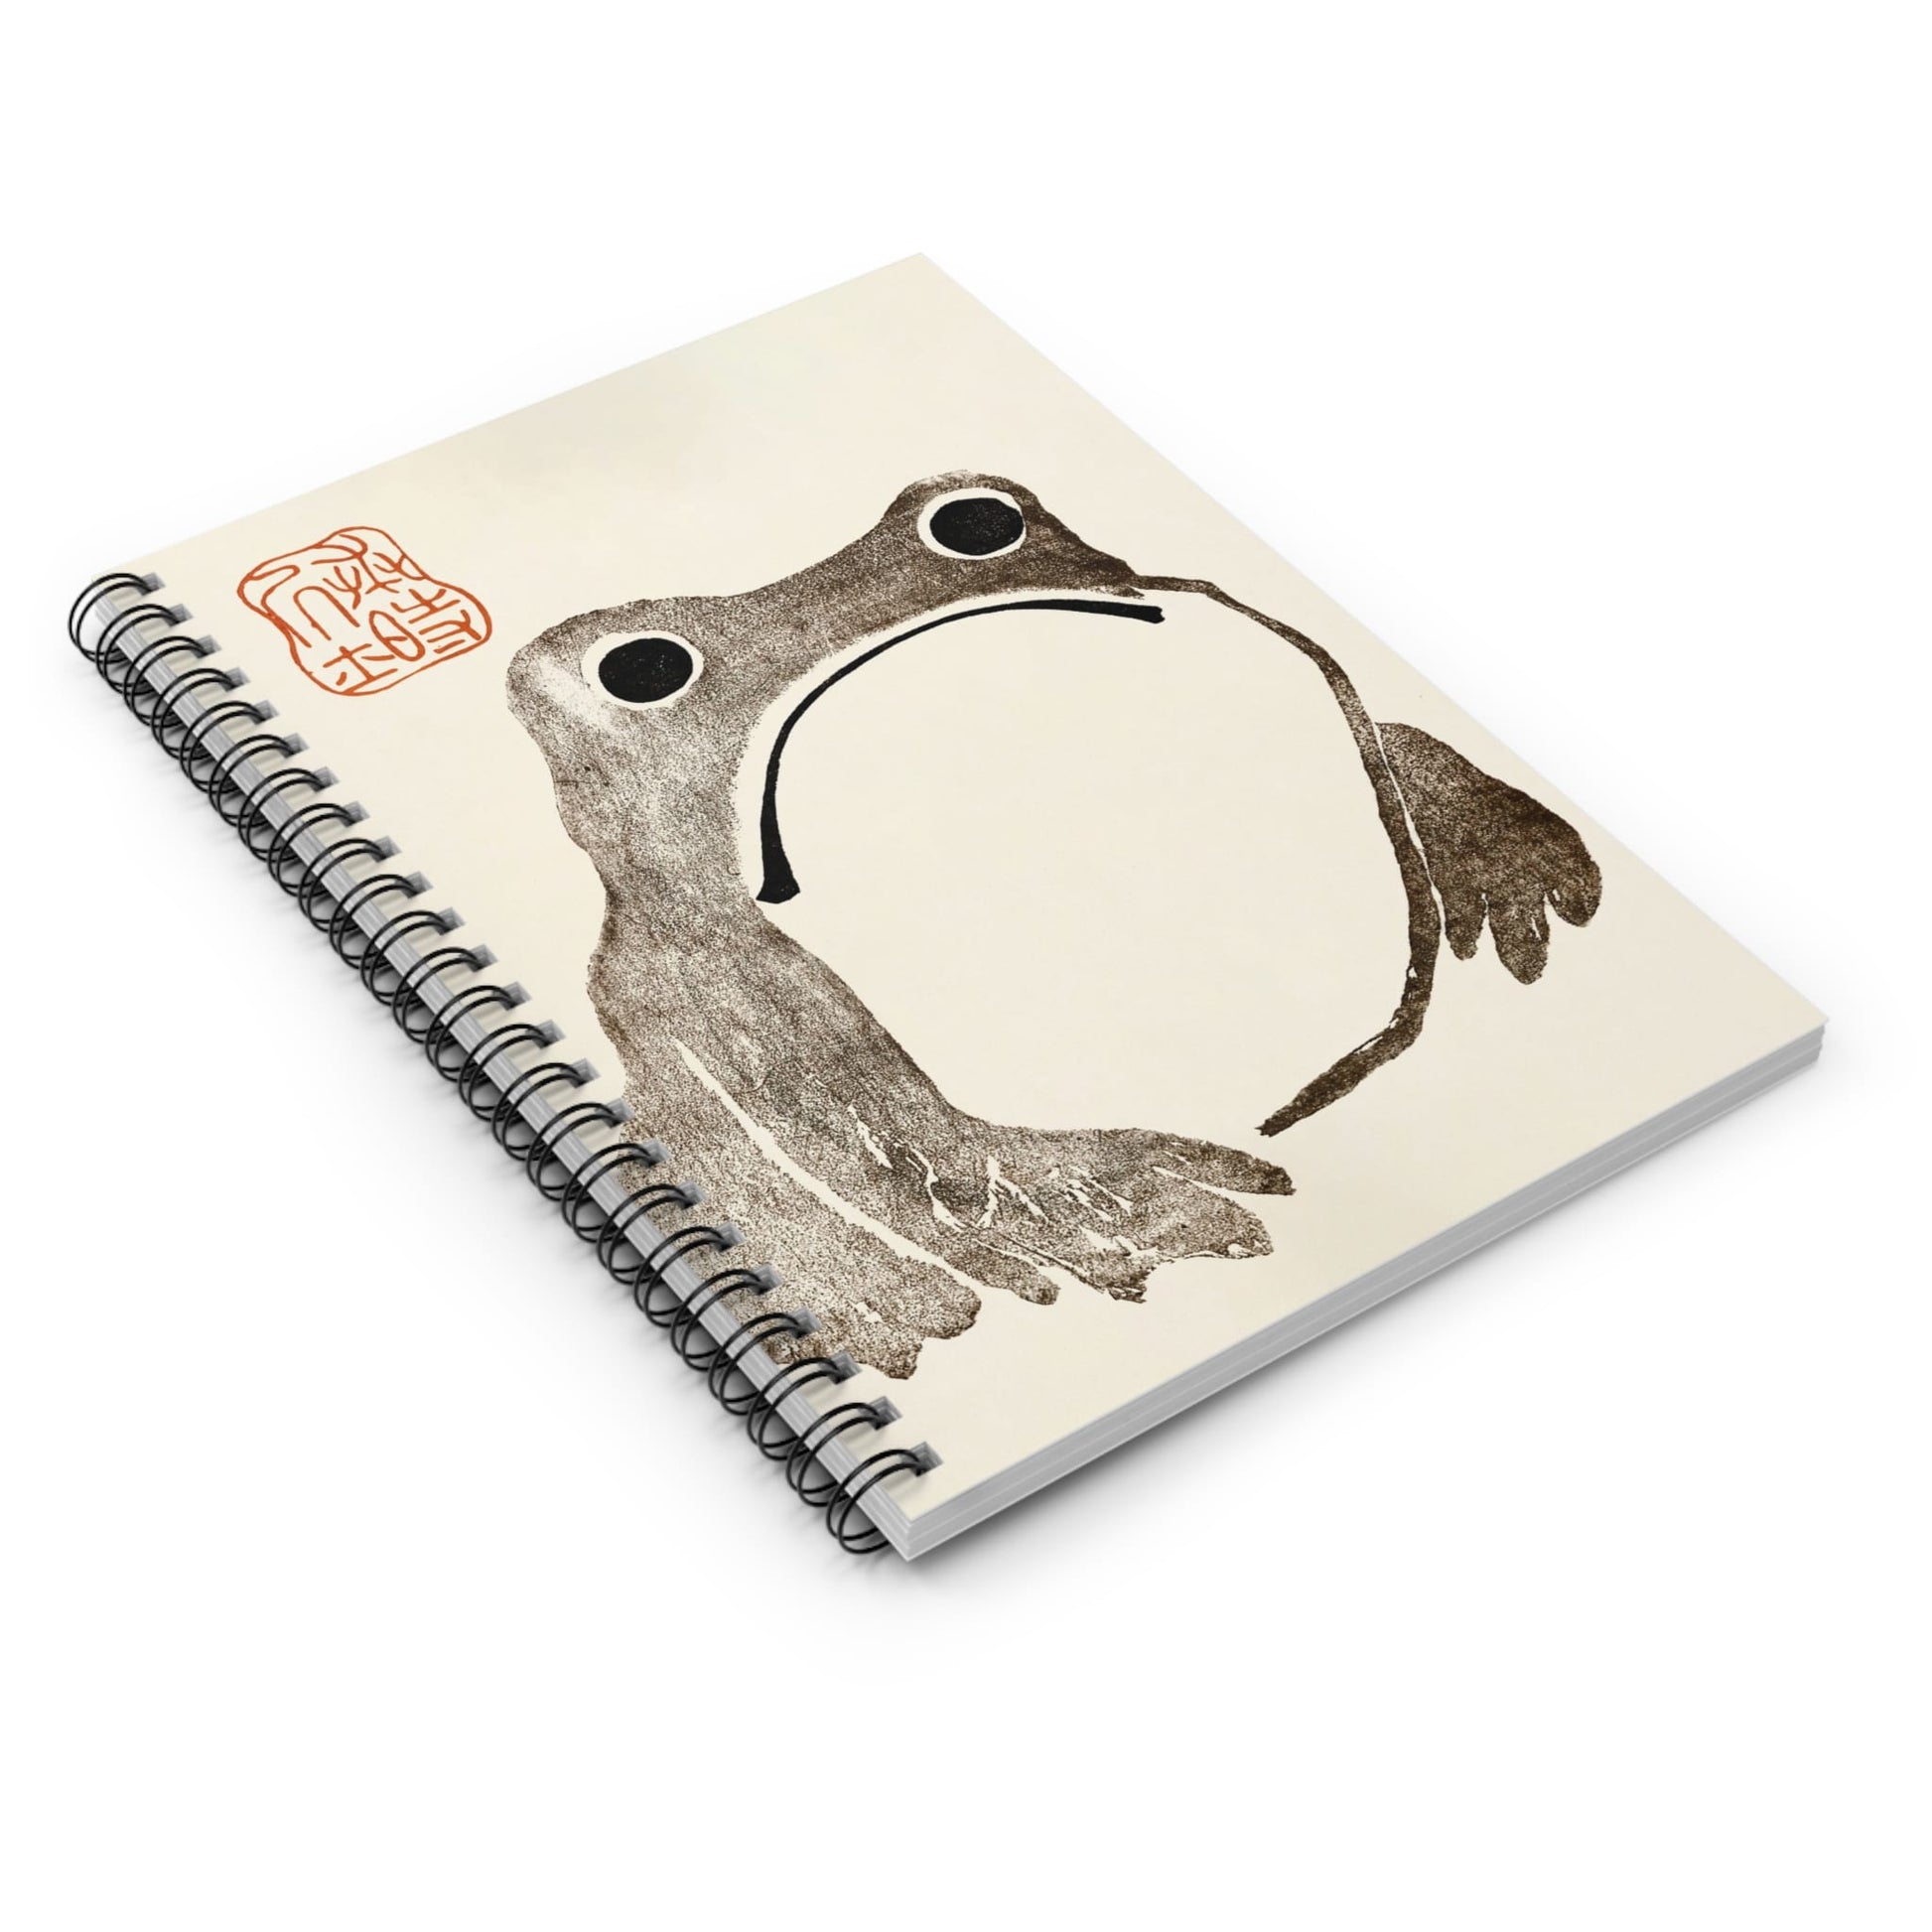 Grumpy Frog Spiral Notebook Laying Flat on White Surface